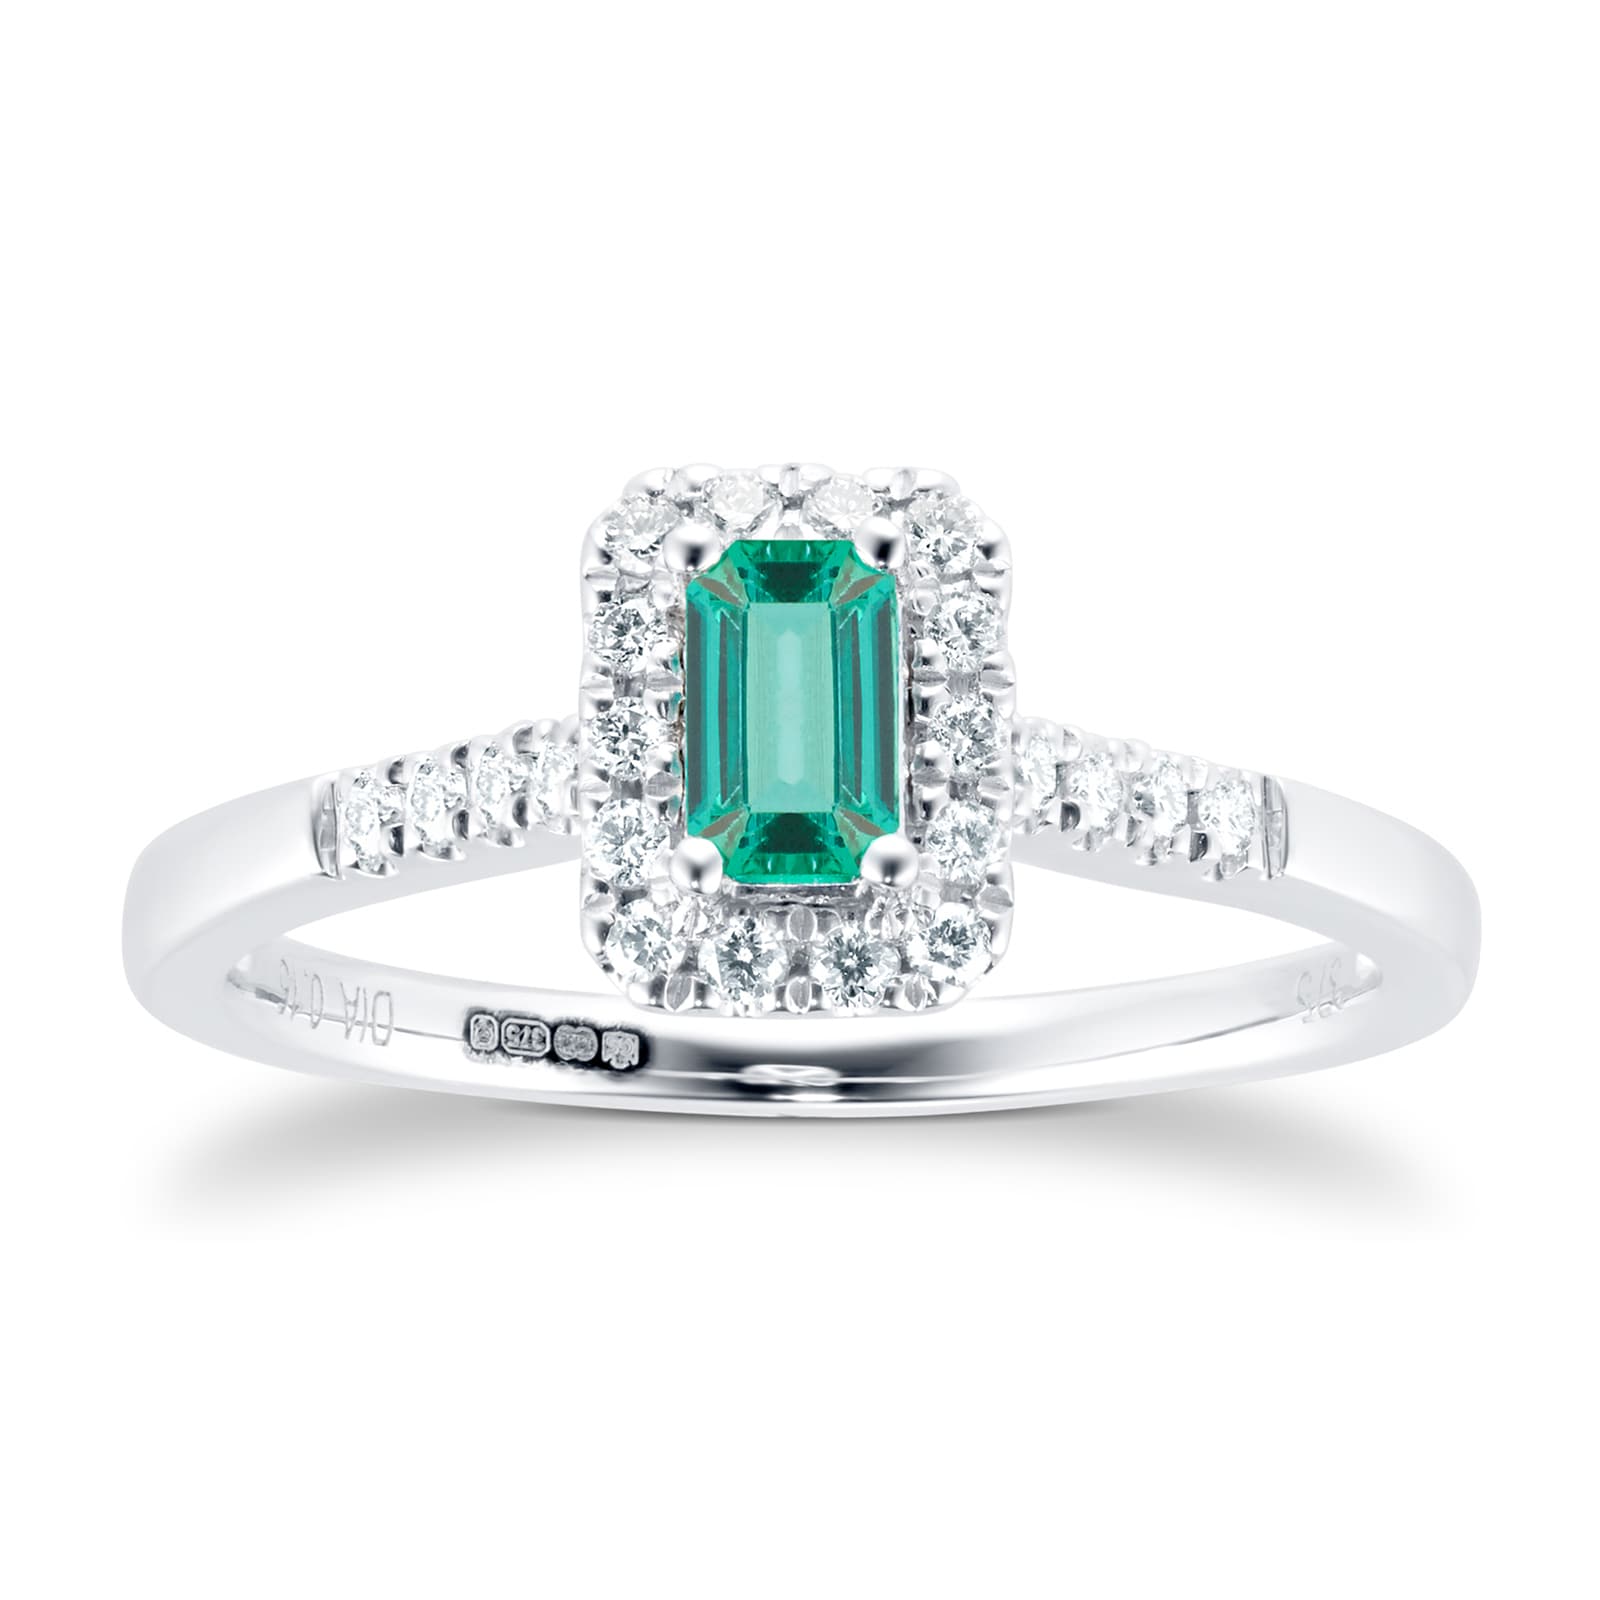 Reine Green Emerald Ring - L'Excellence